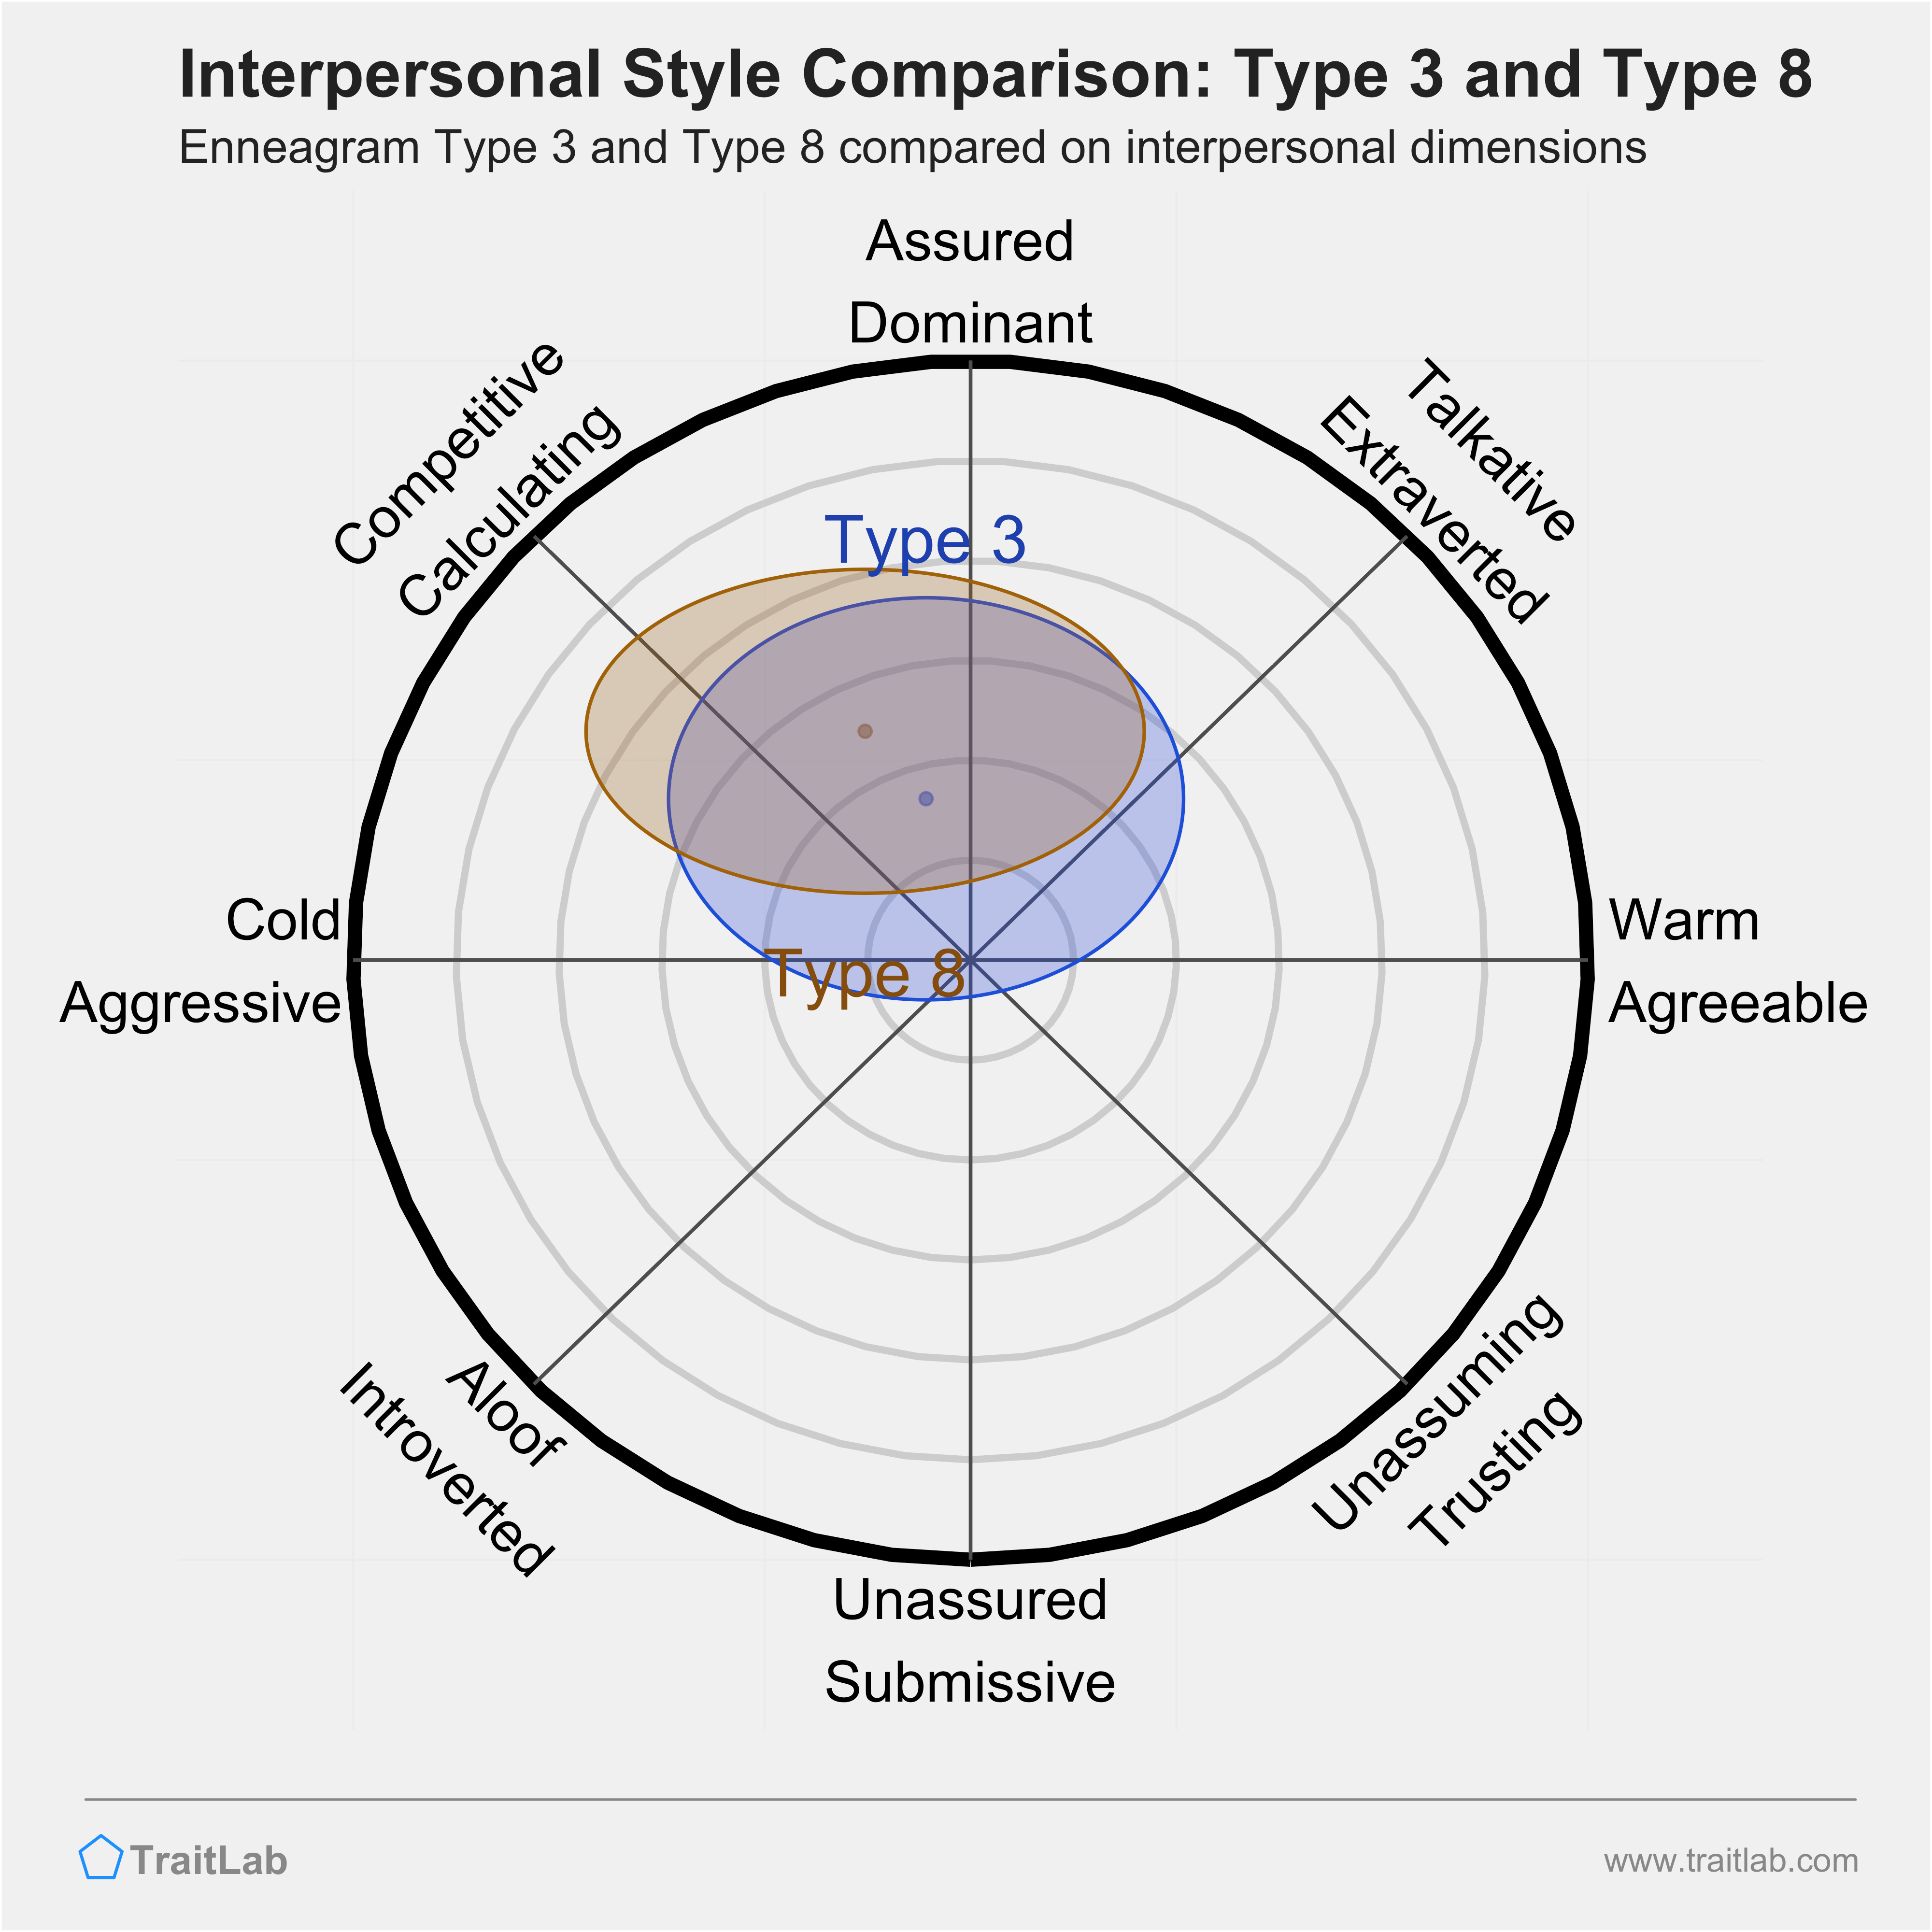 Enneagram Type 3 and Type 8 comparison across interpersonal dimensions